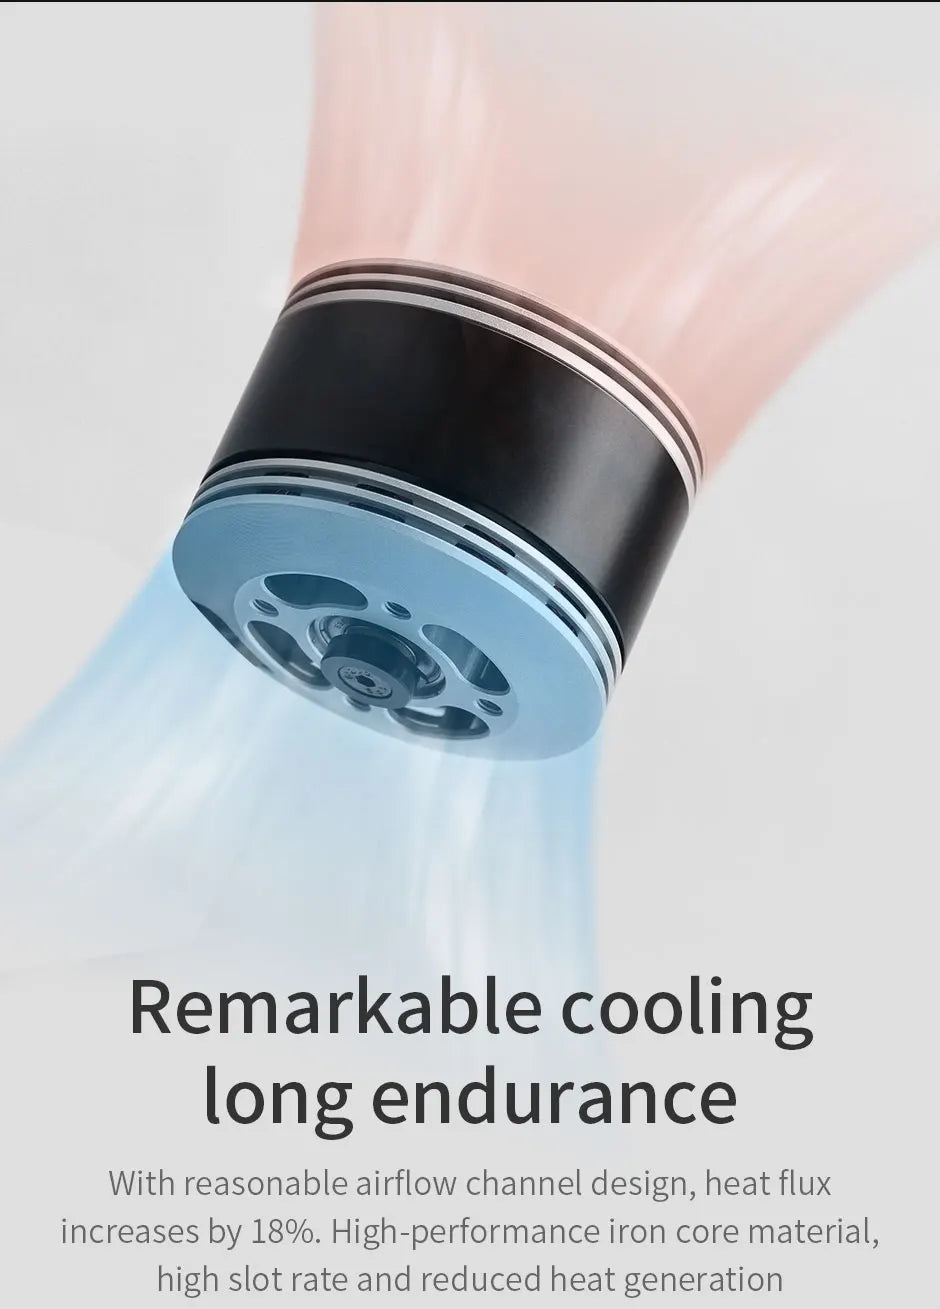 T-MOTOR, Remarkable cooling long endurance With reasonable airflow channel design, heat flux increases by 18%